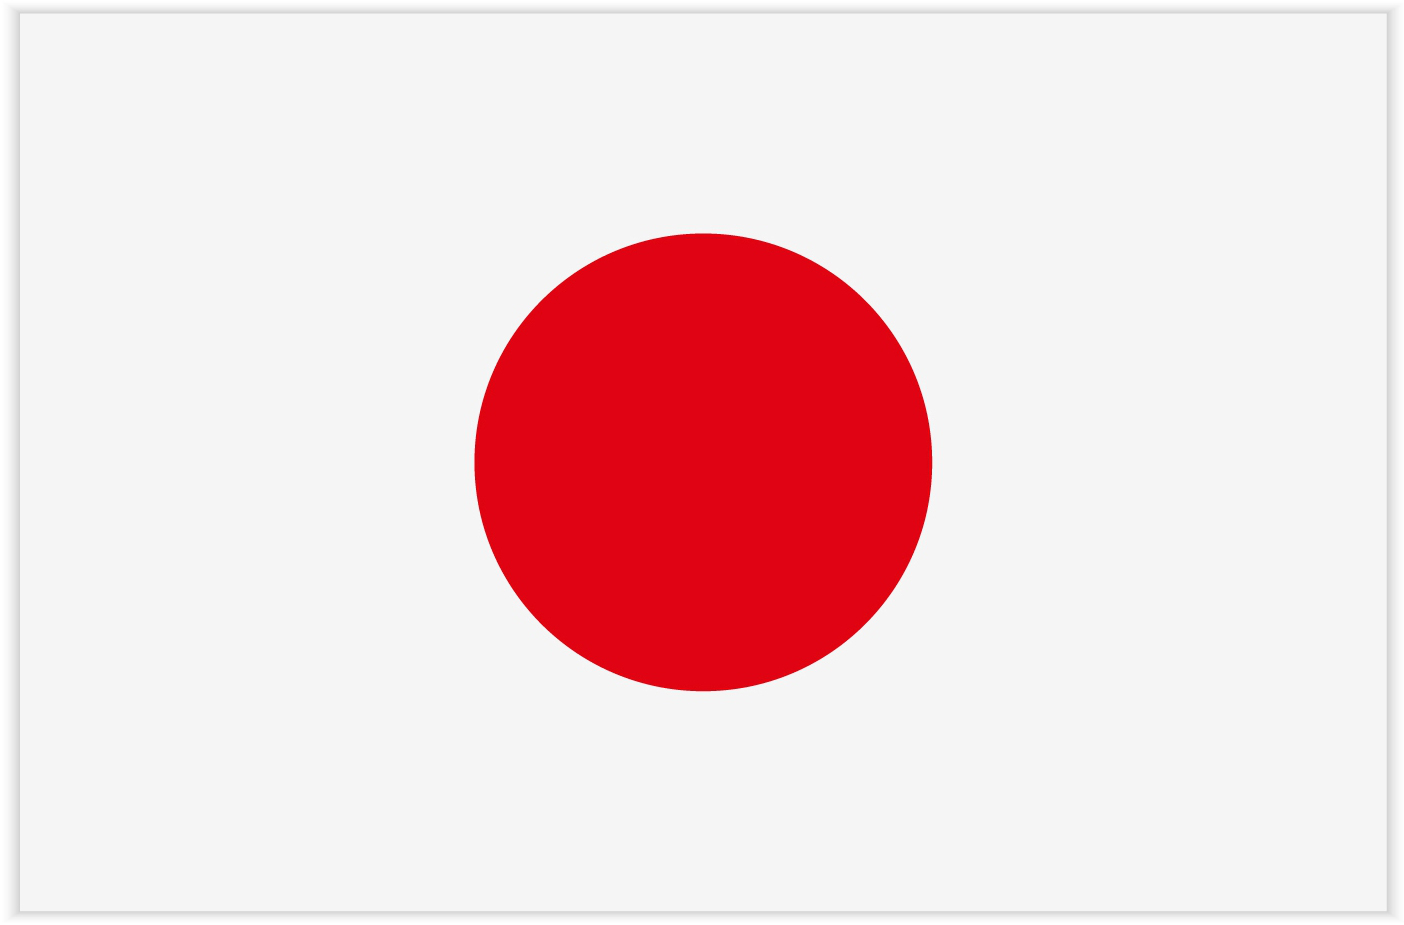 Japan to Simplify Patent Screening Processes Using Artificial Intelligence at the JPO